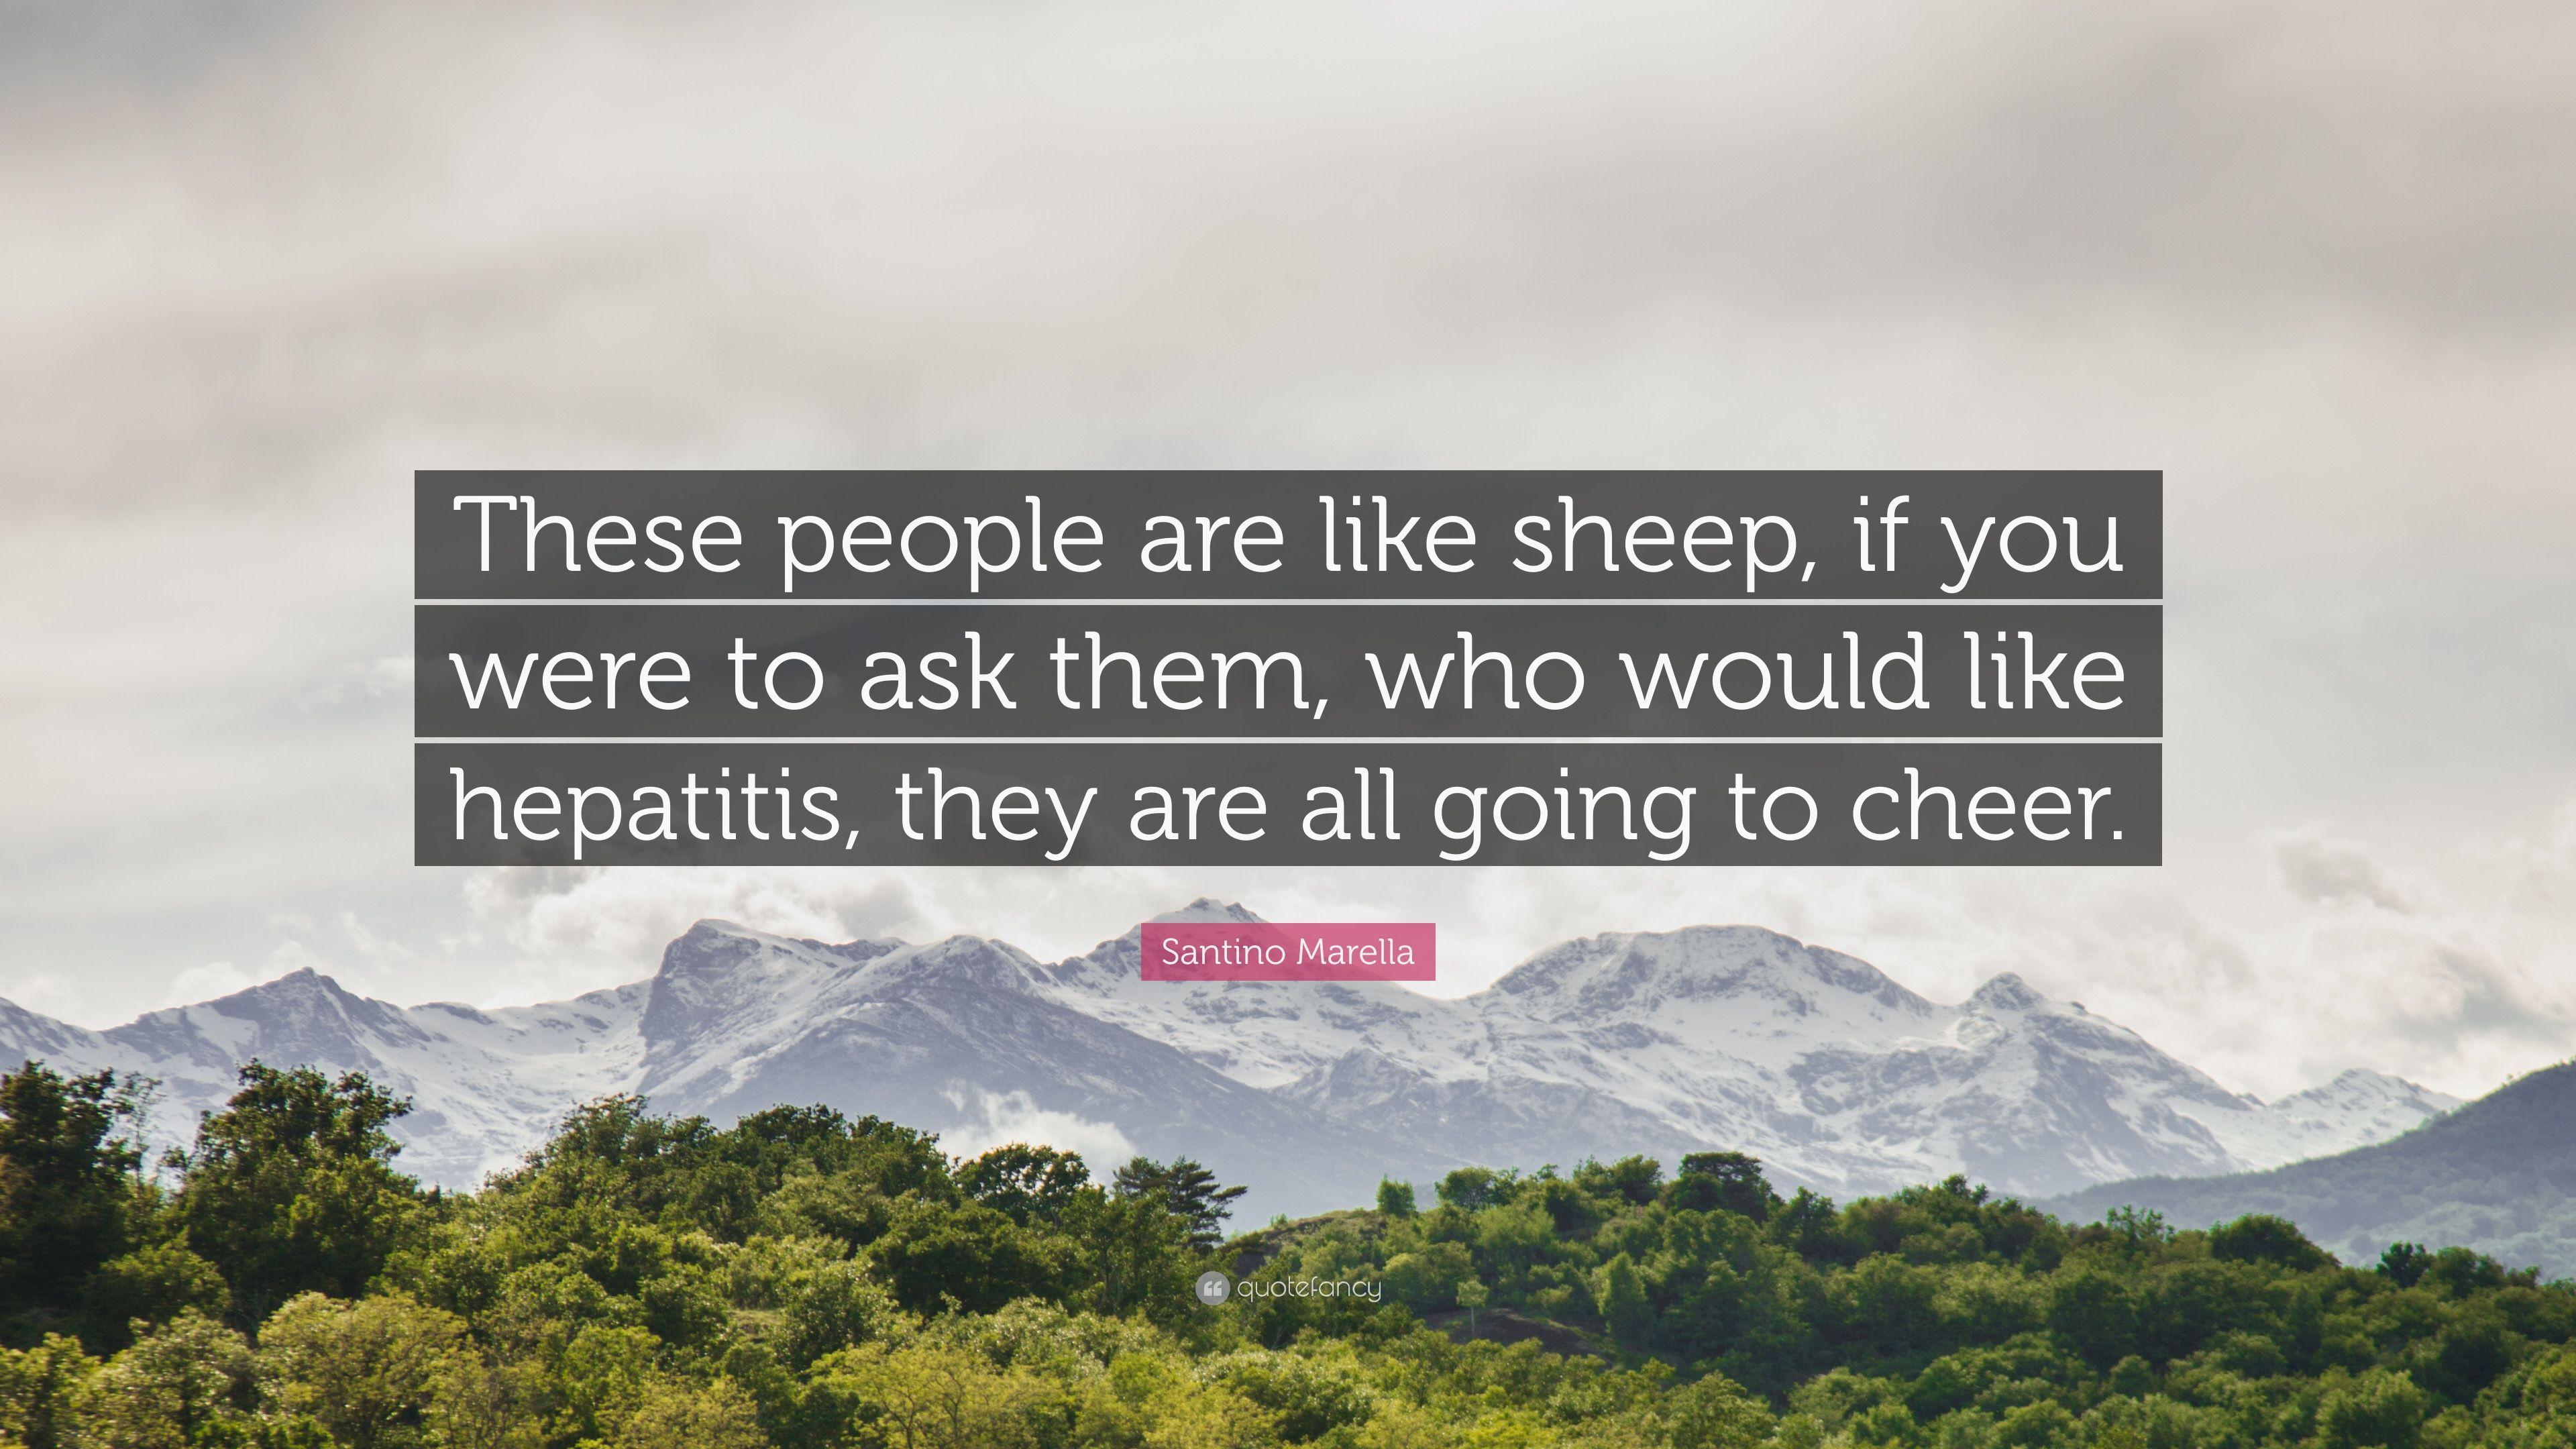 Santino Marella Quote: “These people are like sheep, if you were to